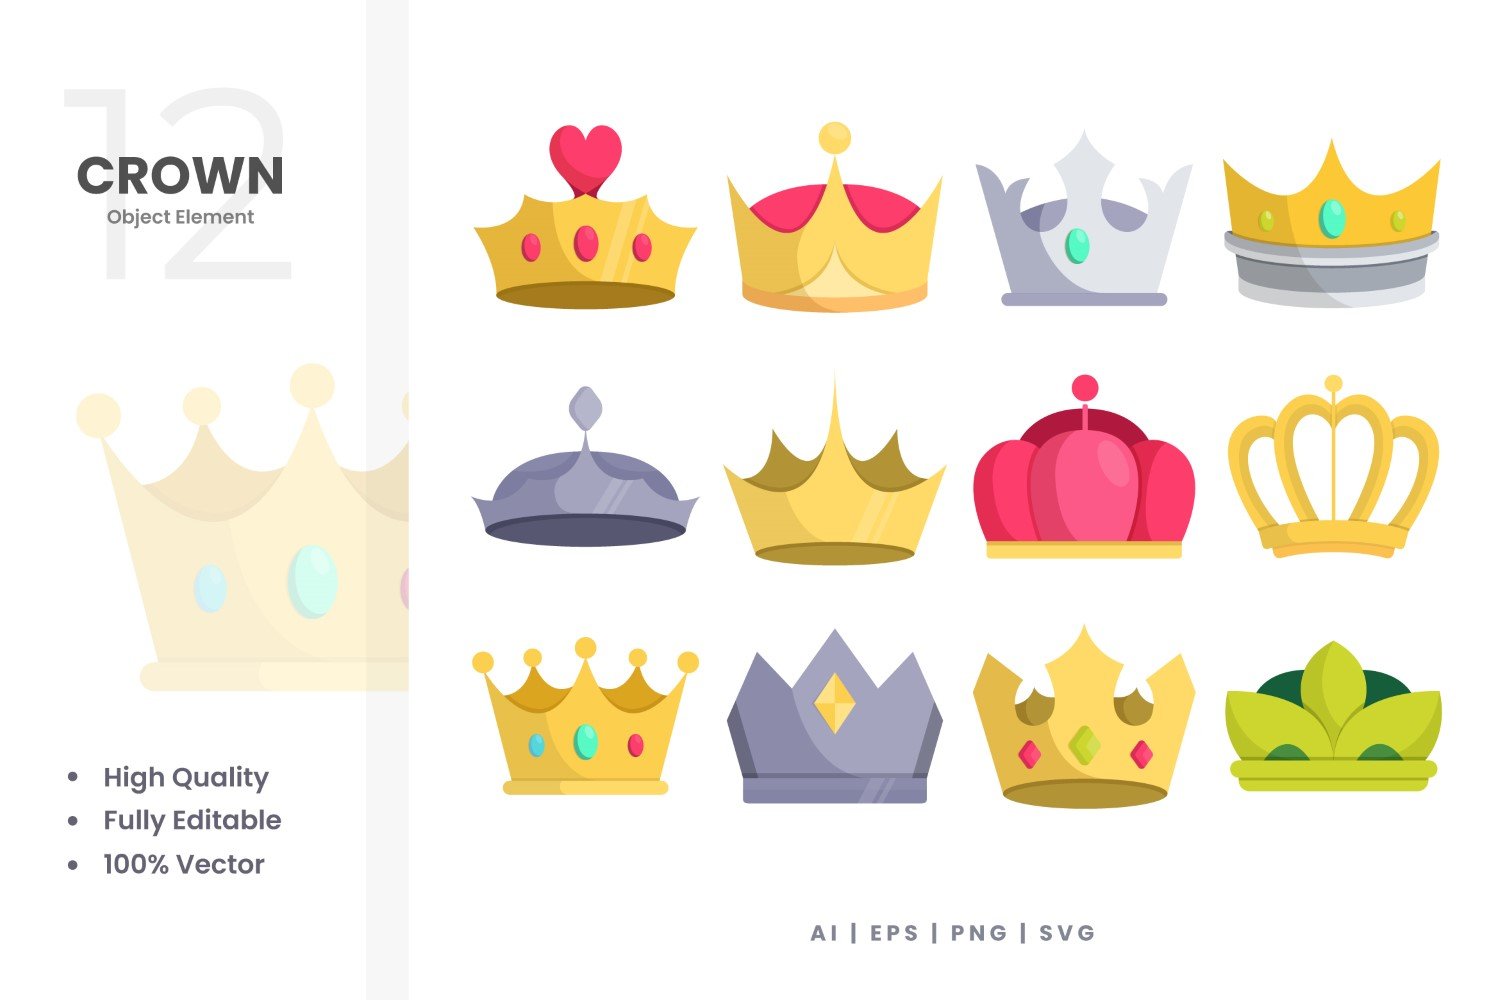 Template #378466 Collection Crown Webdesign Template - Logo template Preview